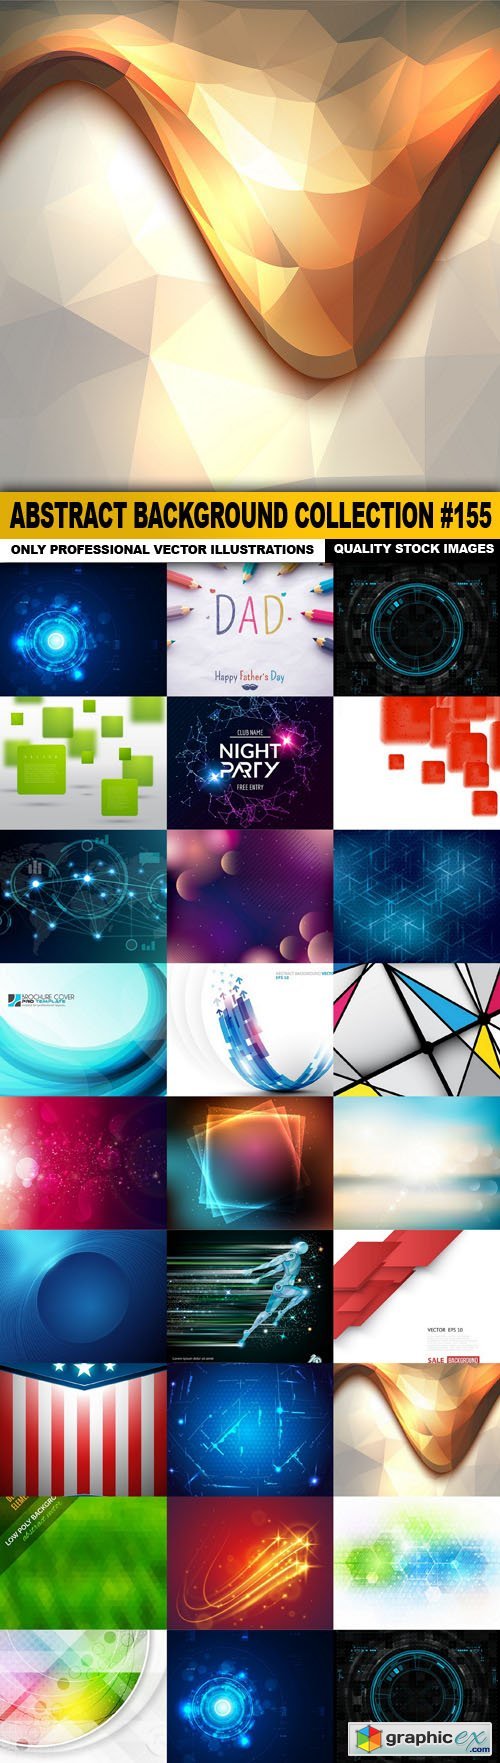 Abstract Background Collection #155 - 25 Vector